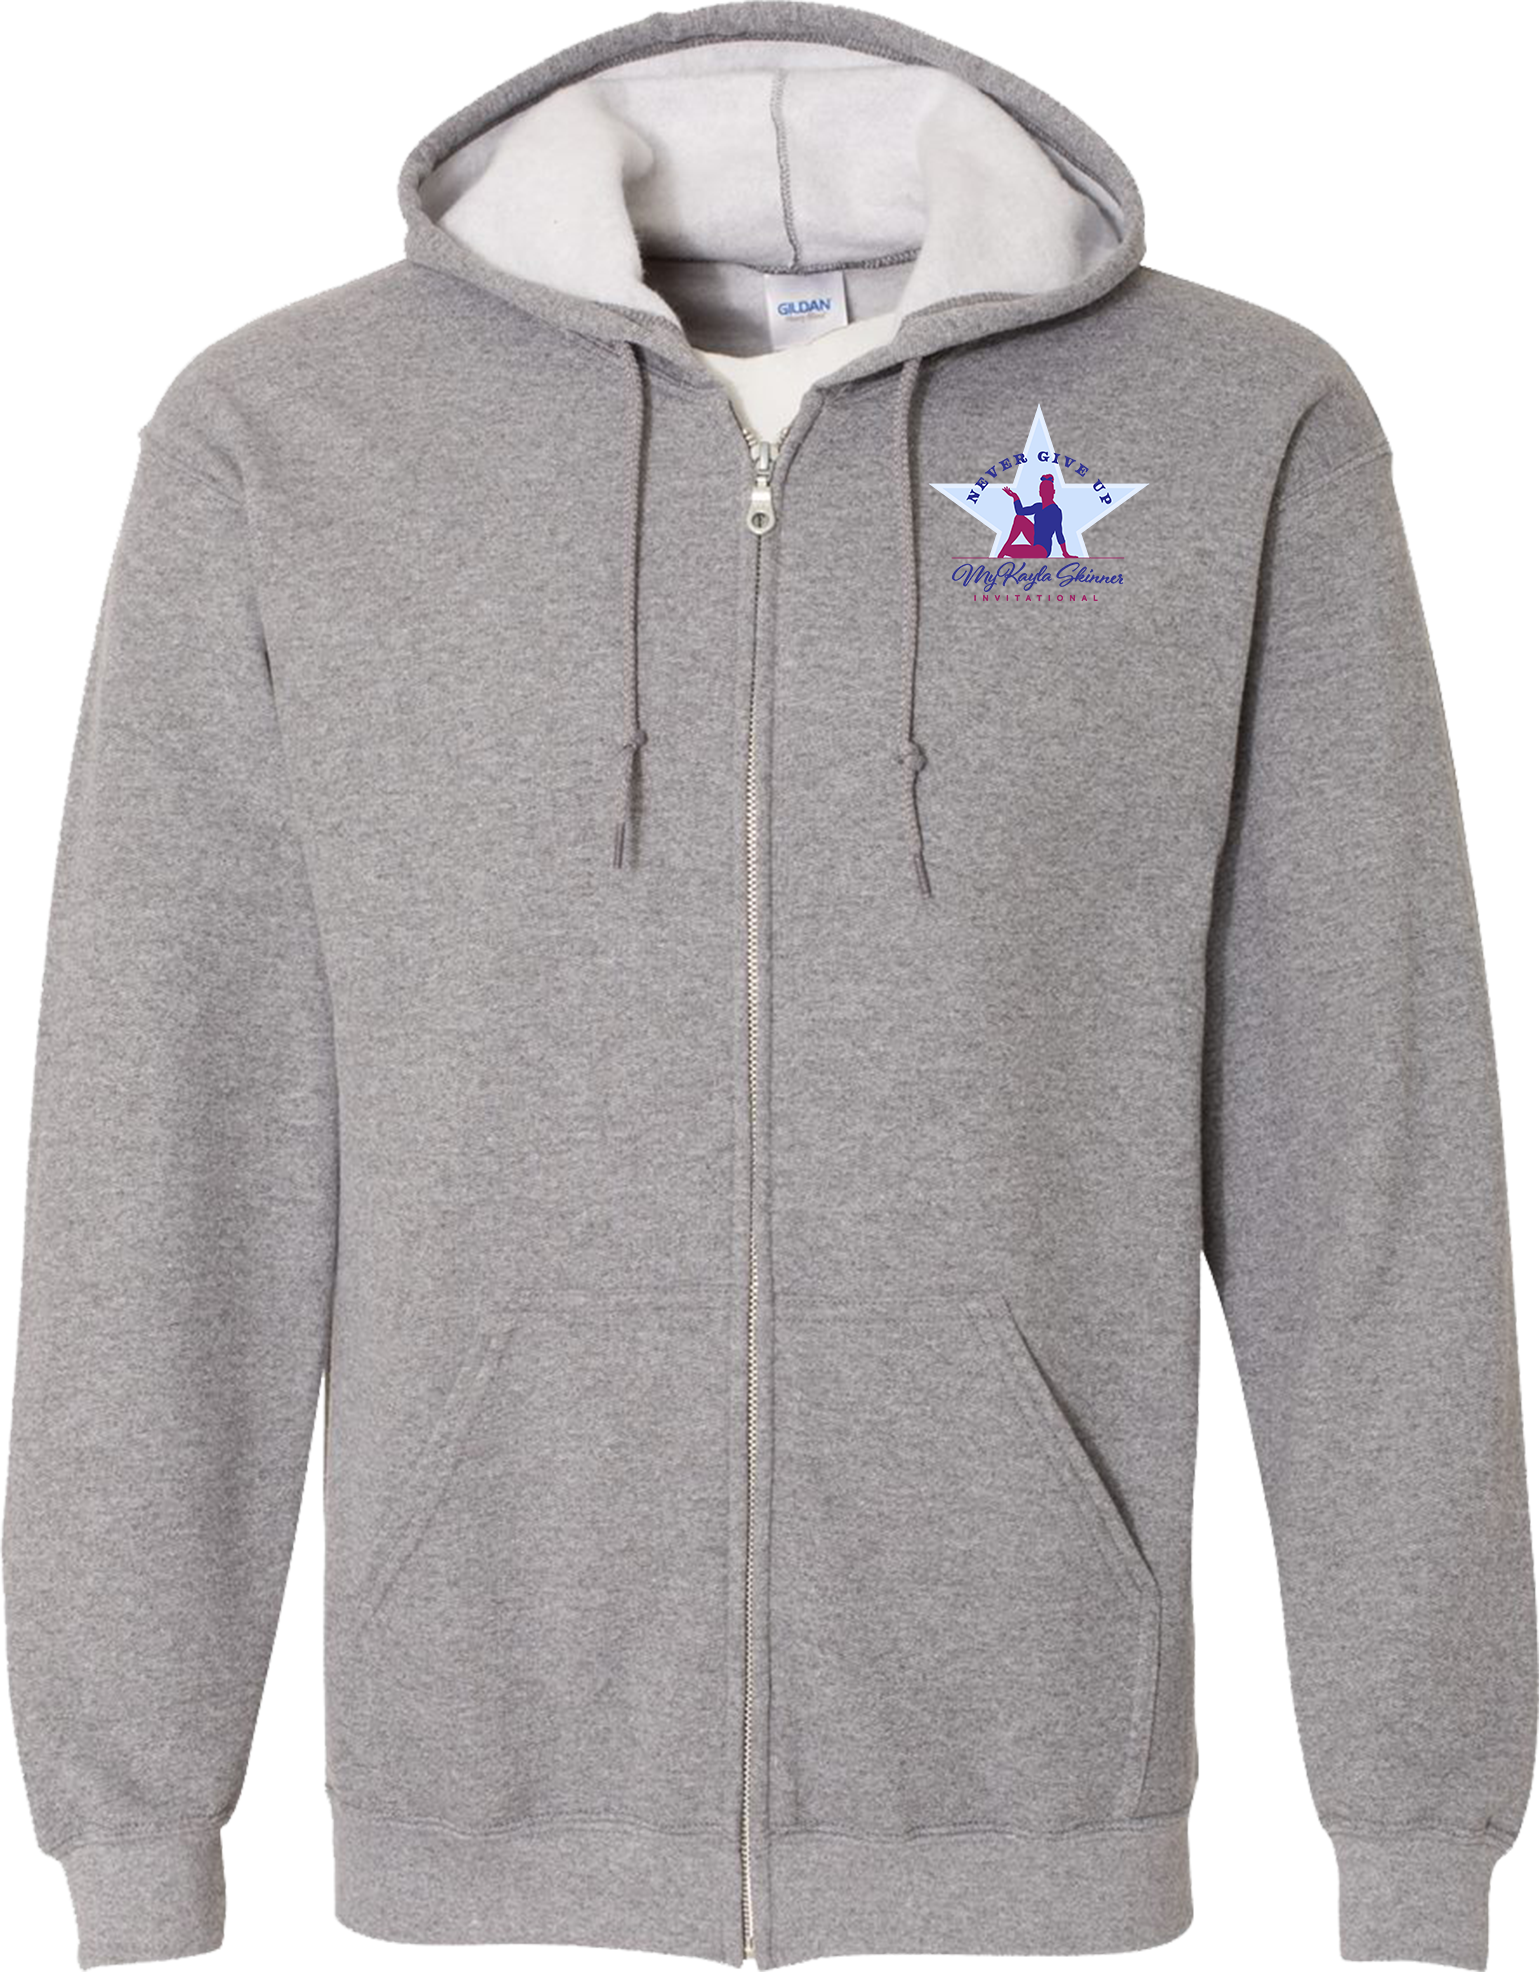 Full Zip Hoodies - 2024 Never Give Up with MyKayla Skinner